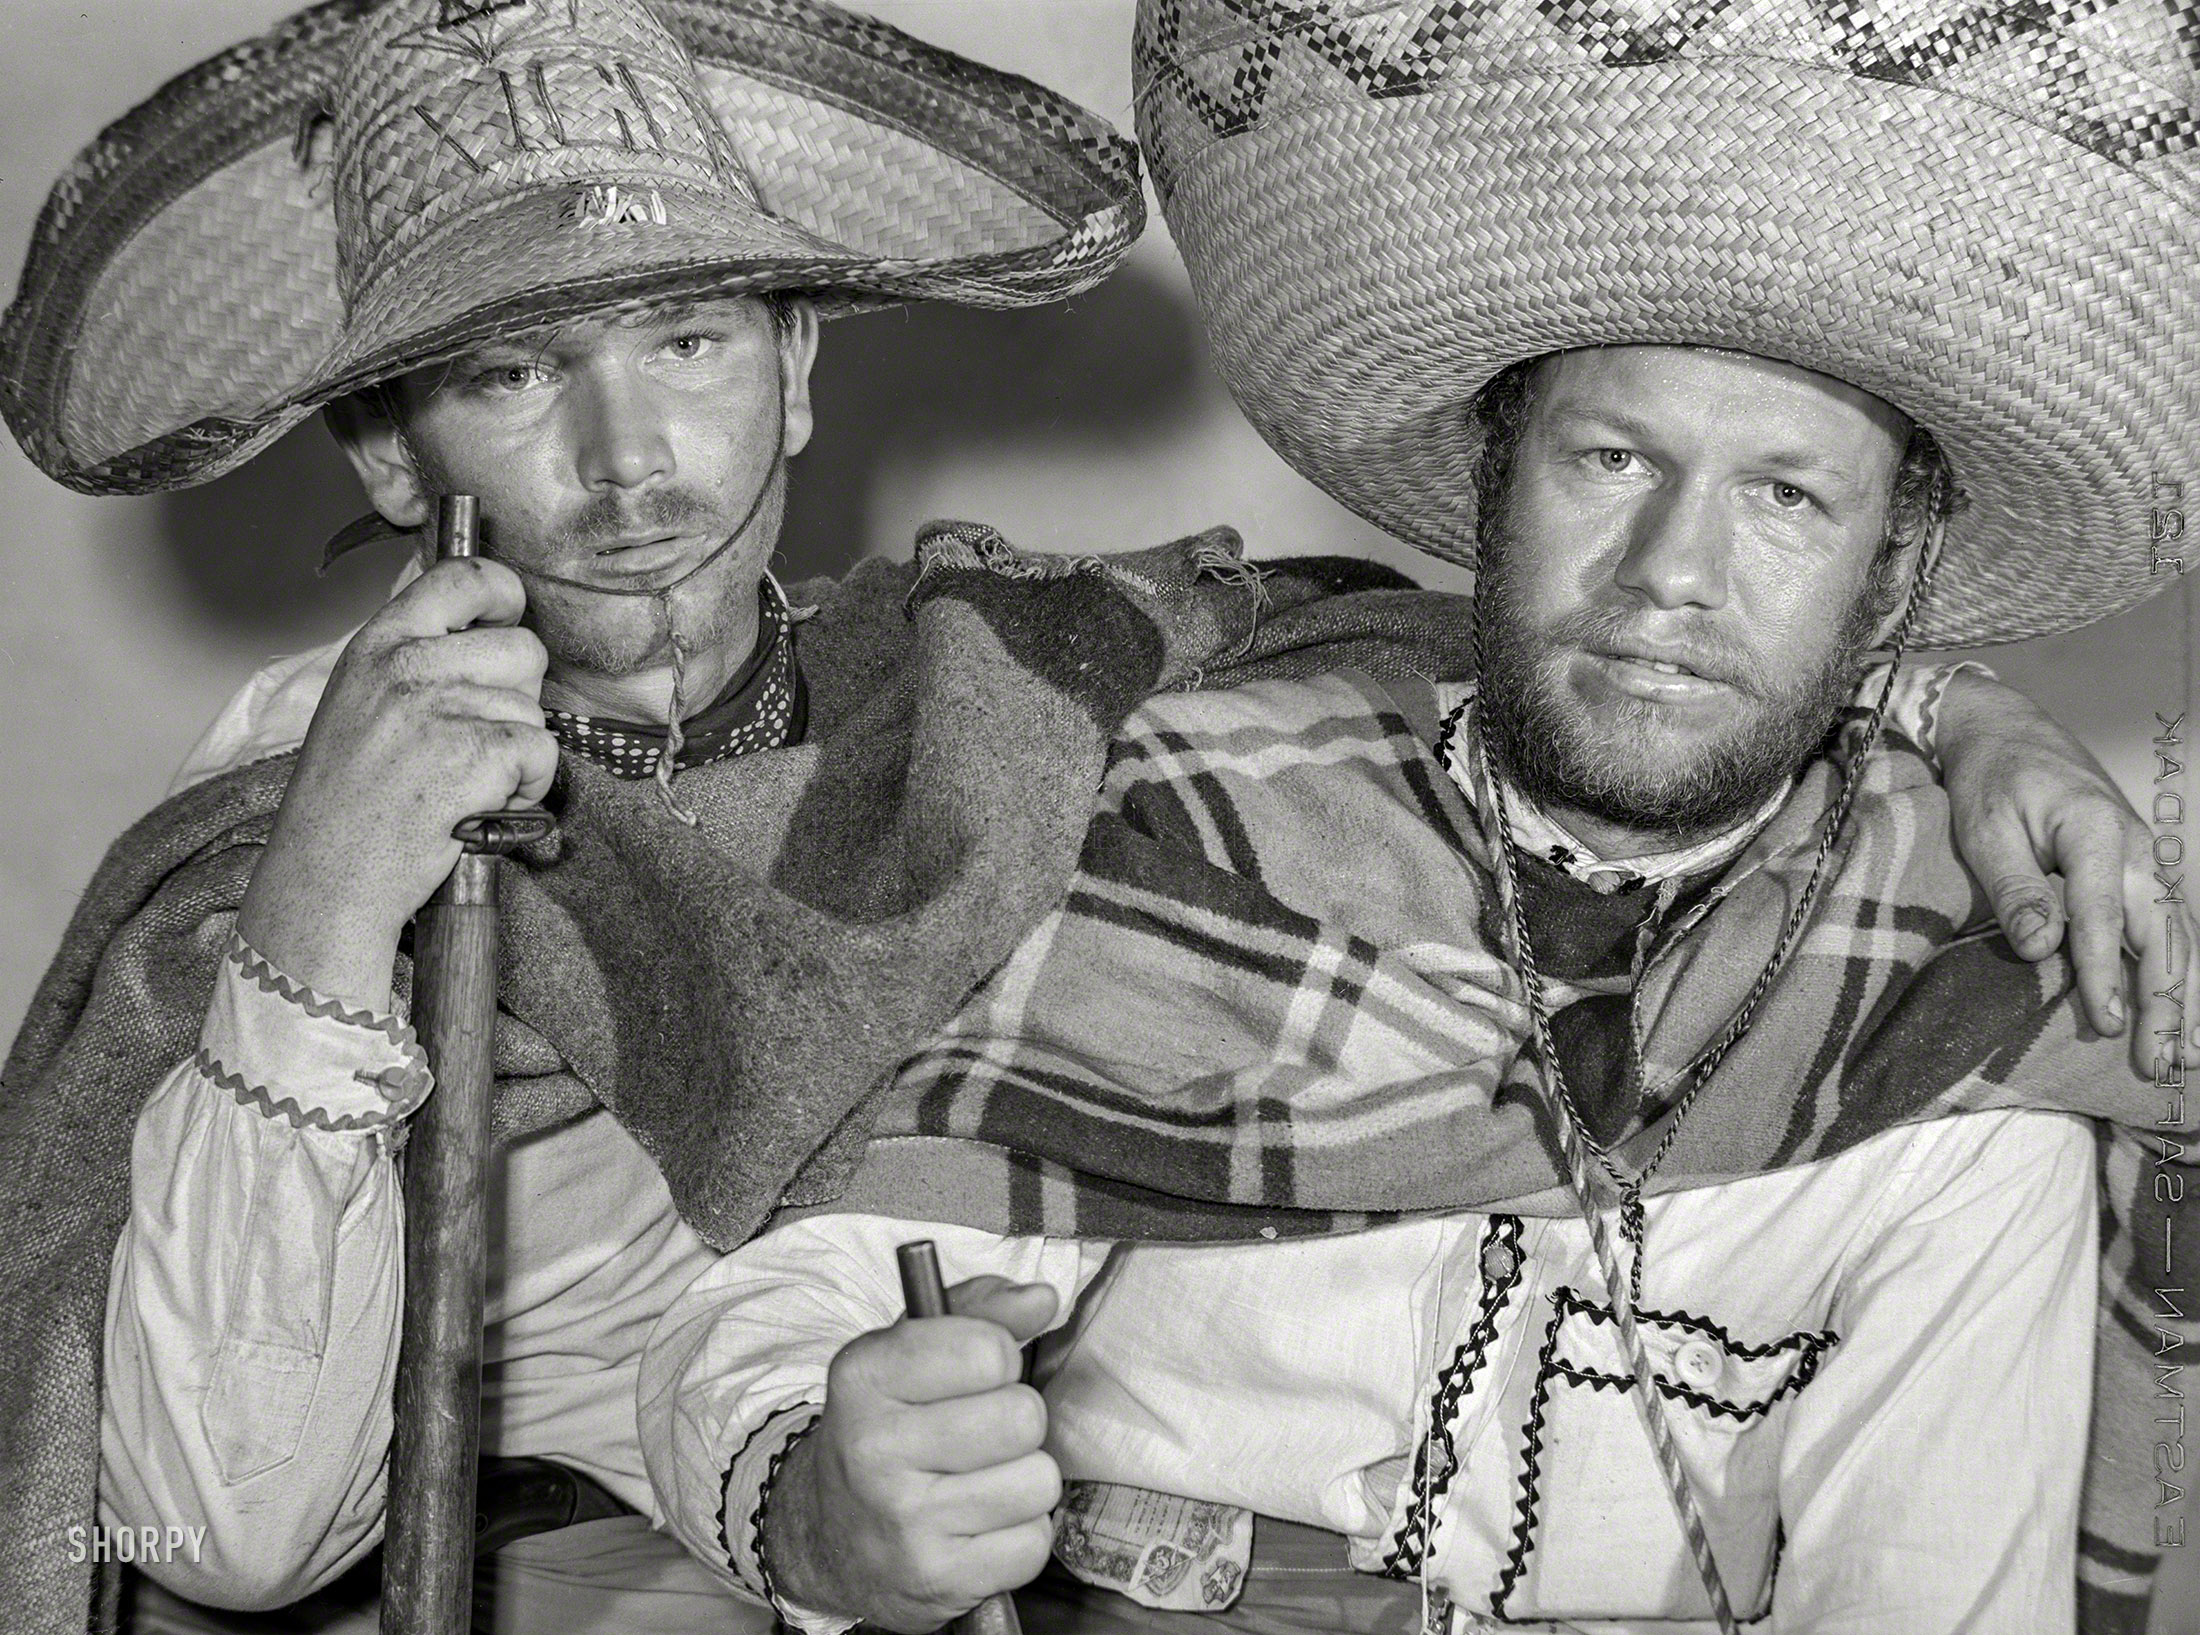 February 1942. "Brownsville, Texas. Charro Days fiesta. A pair of bandidos." Photo by Arthur Rothstein for the Office of War Information. View full size.